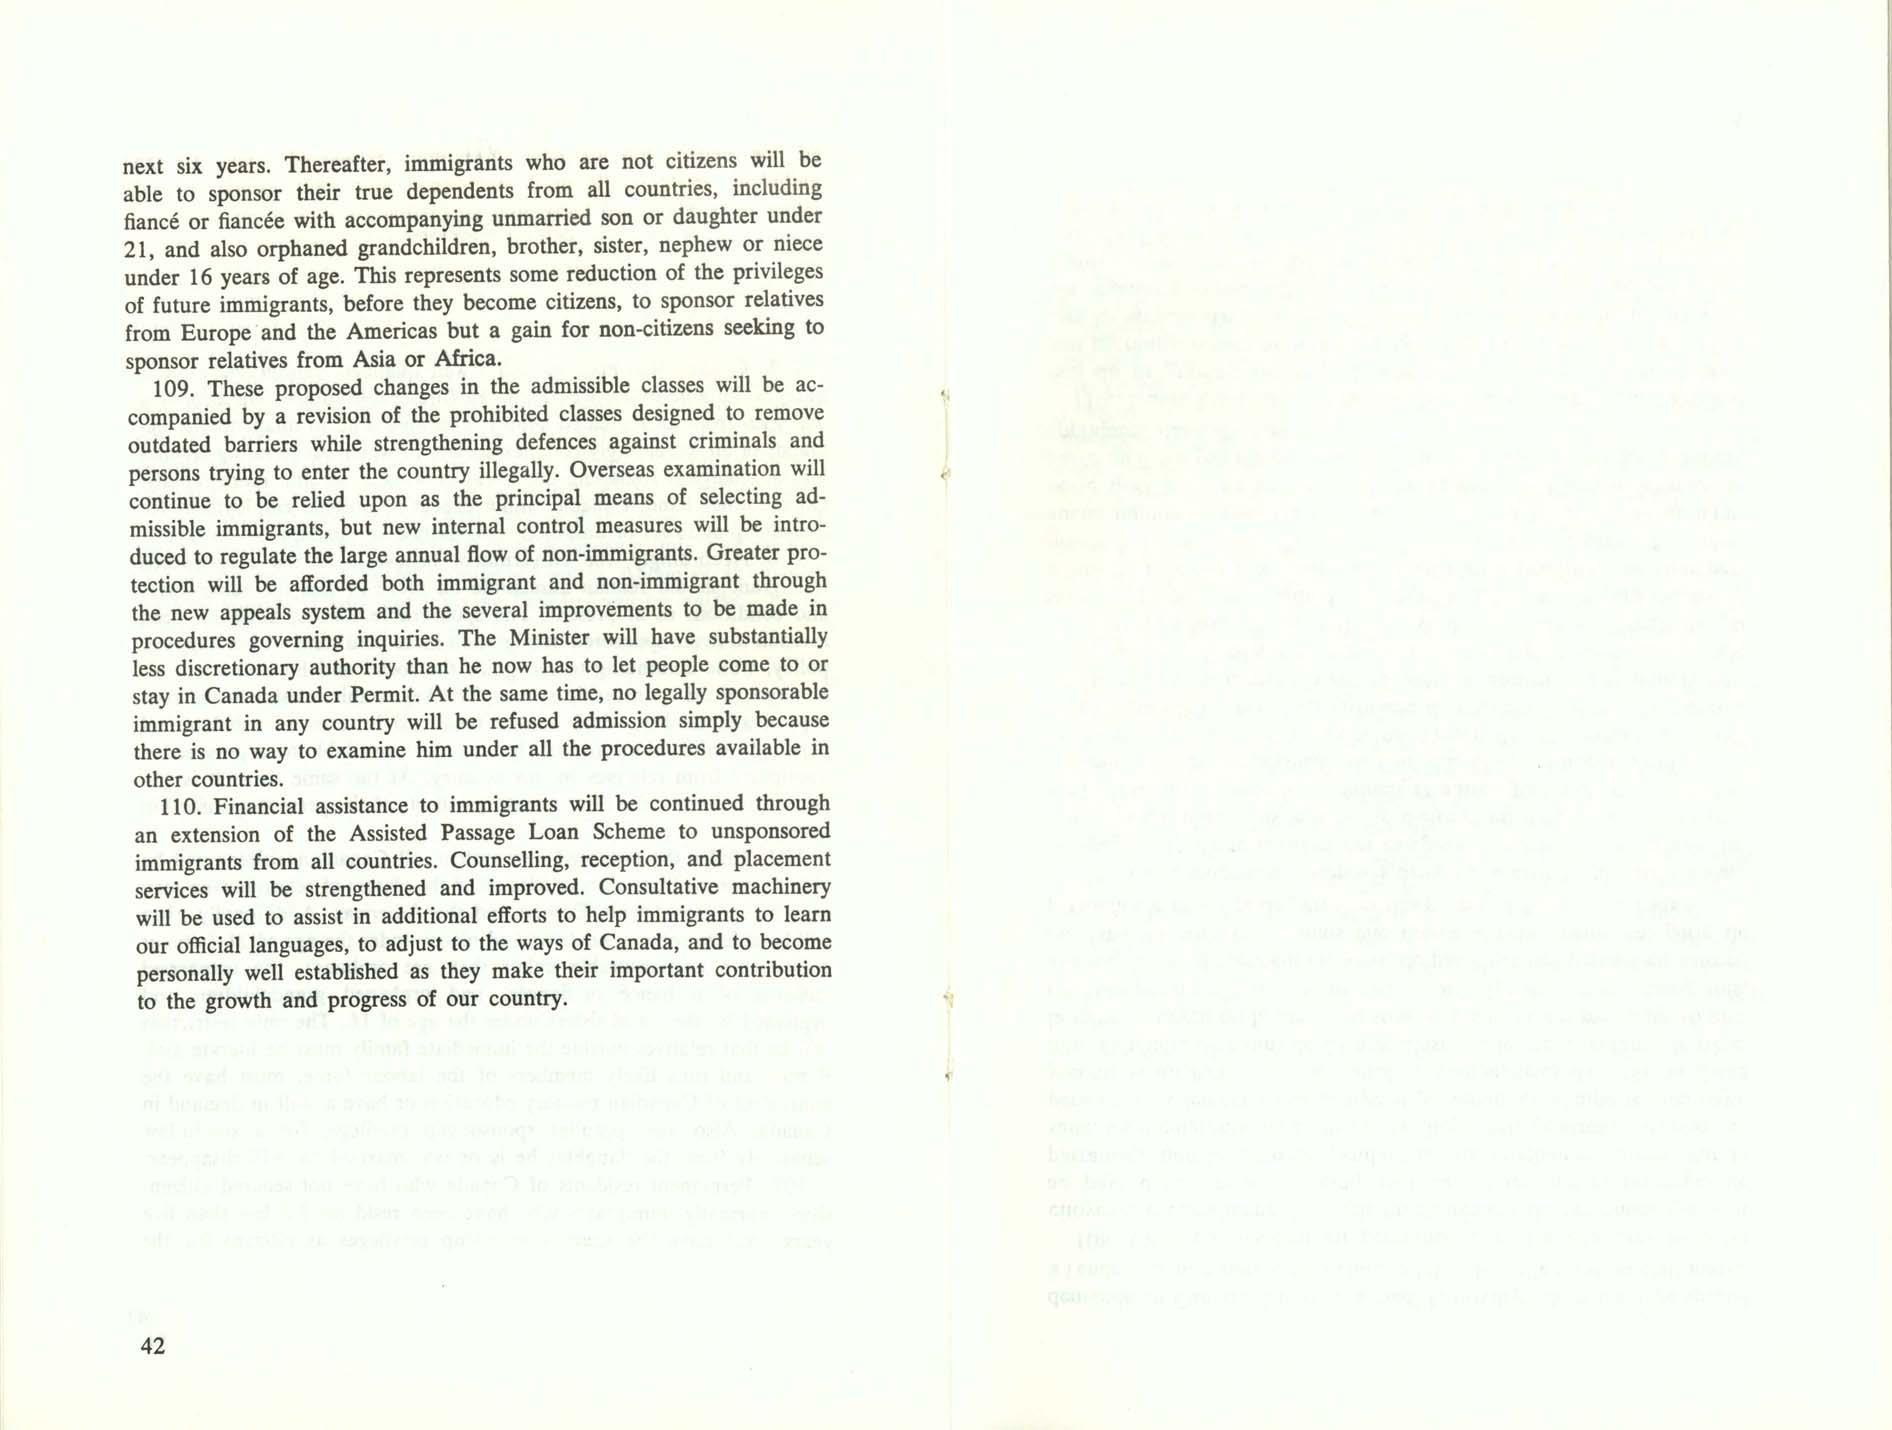 Page 42 White Paper on Immigration, 1966